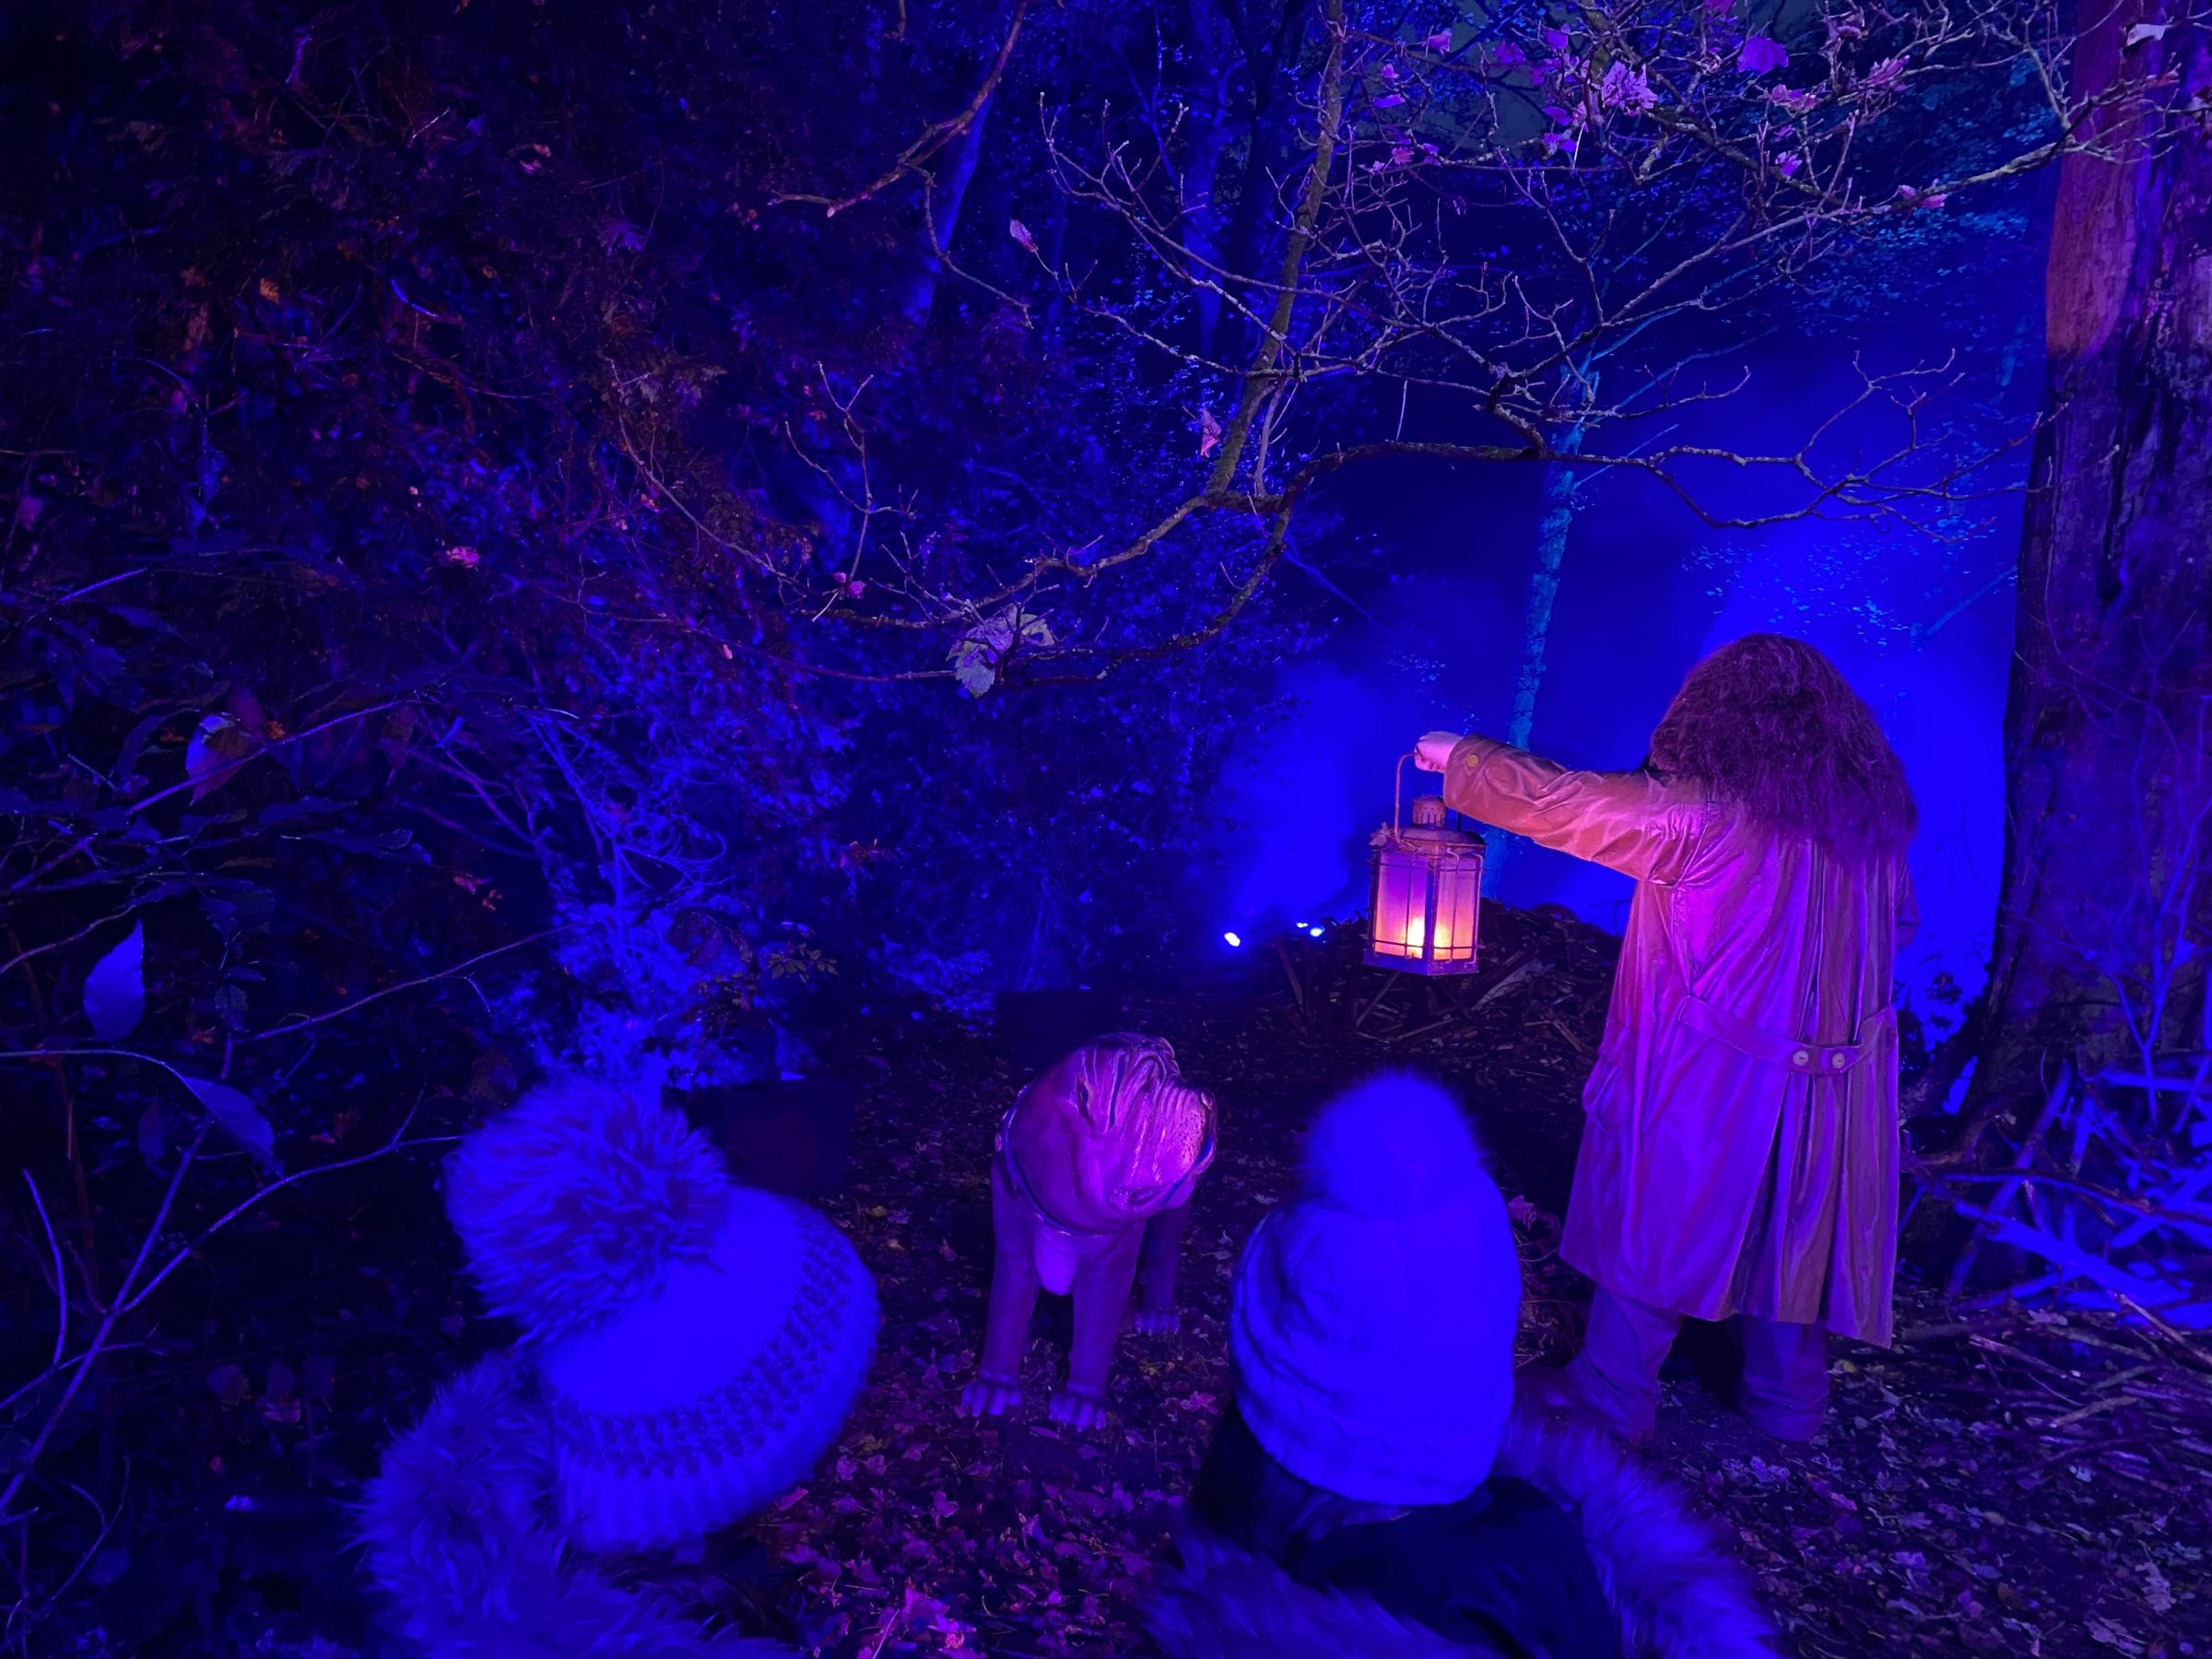 HEEEEERE’S HAGRID! Evelyn and Isla Jones come upon a familiar figure in the Forbidden Forest